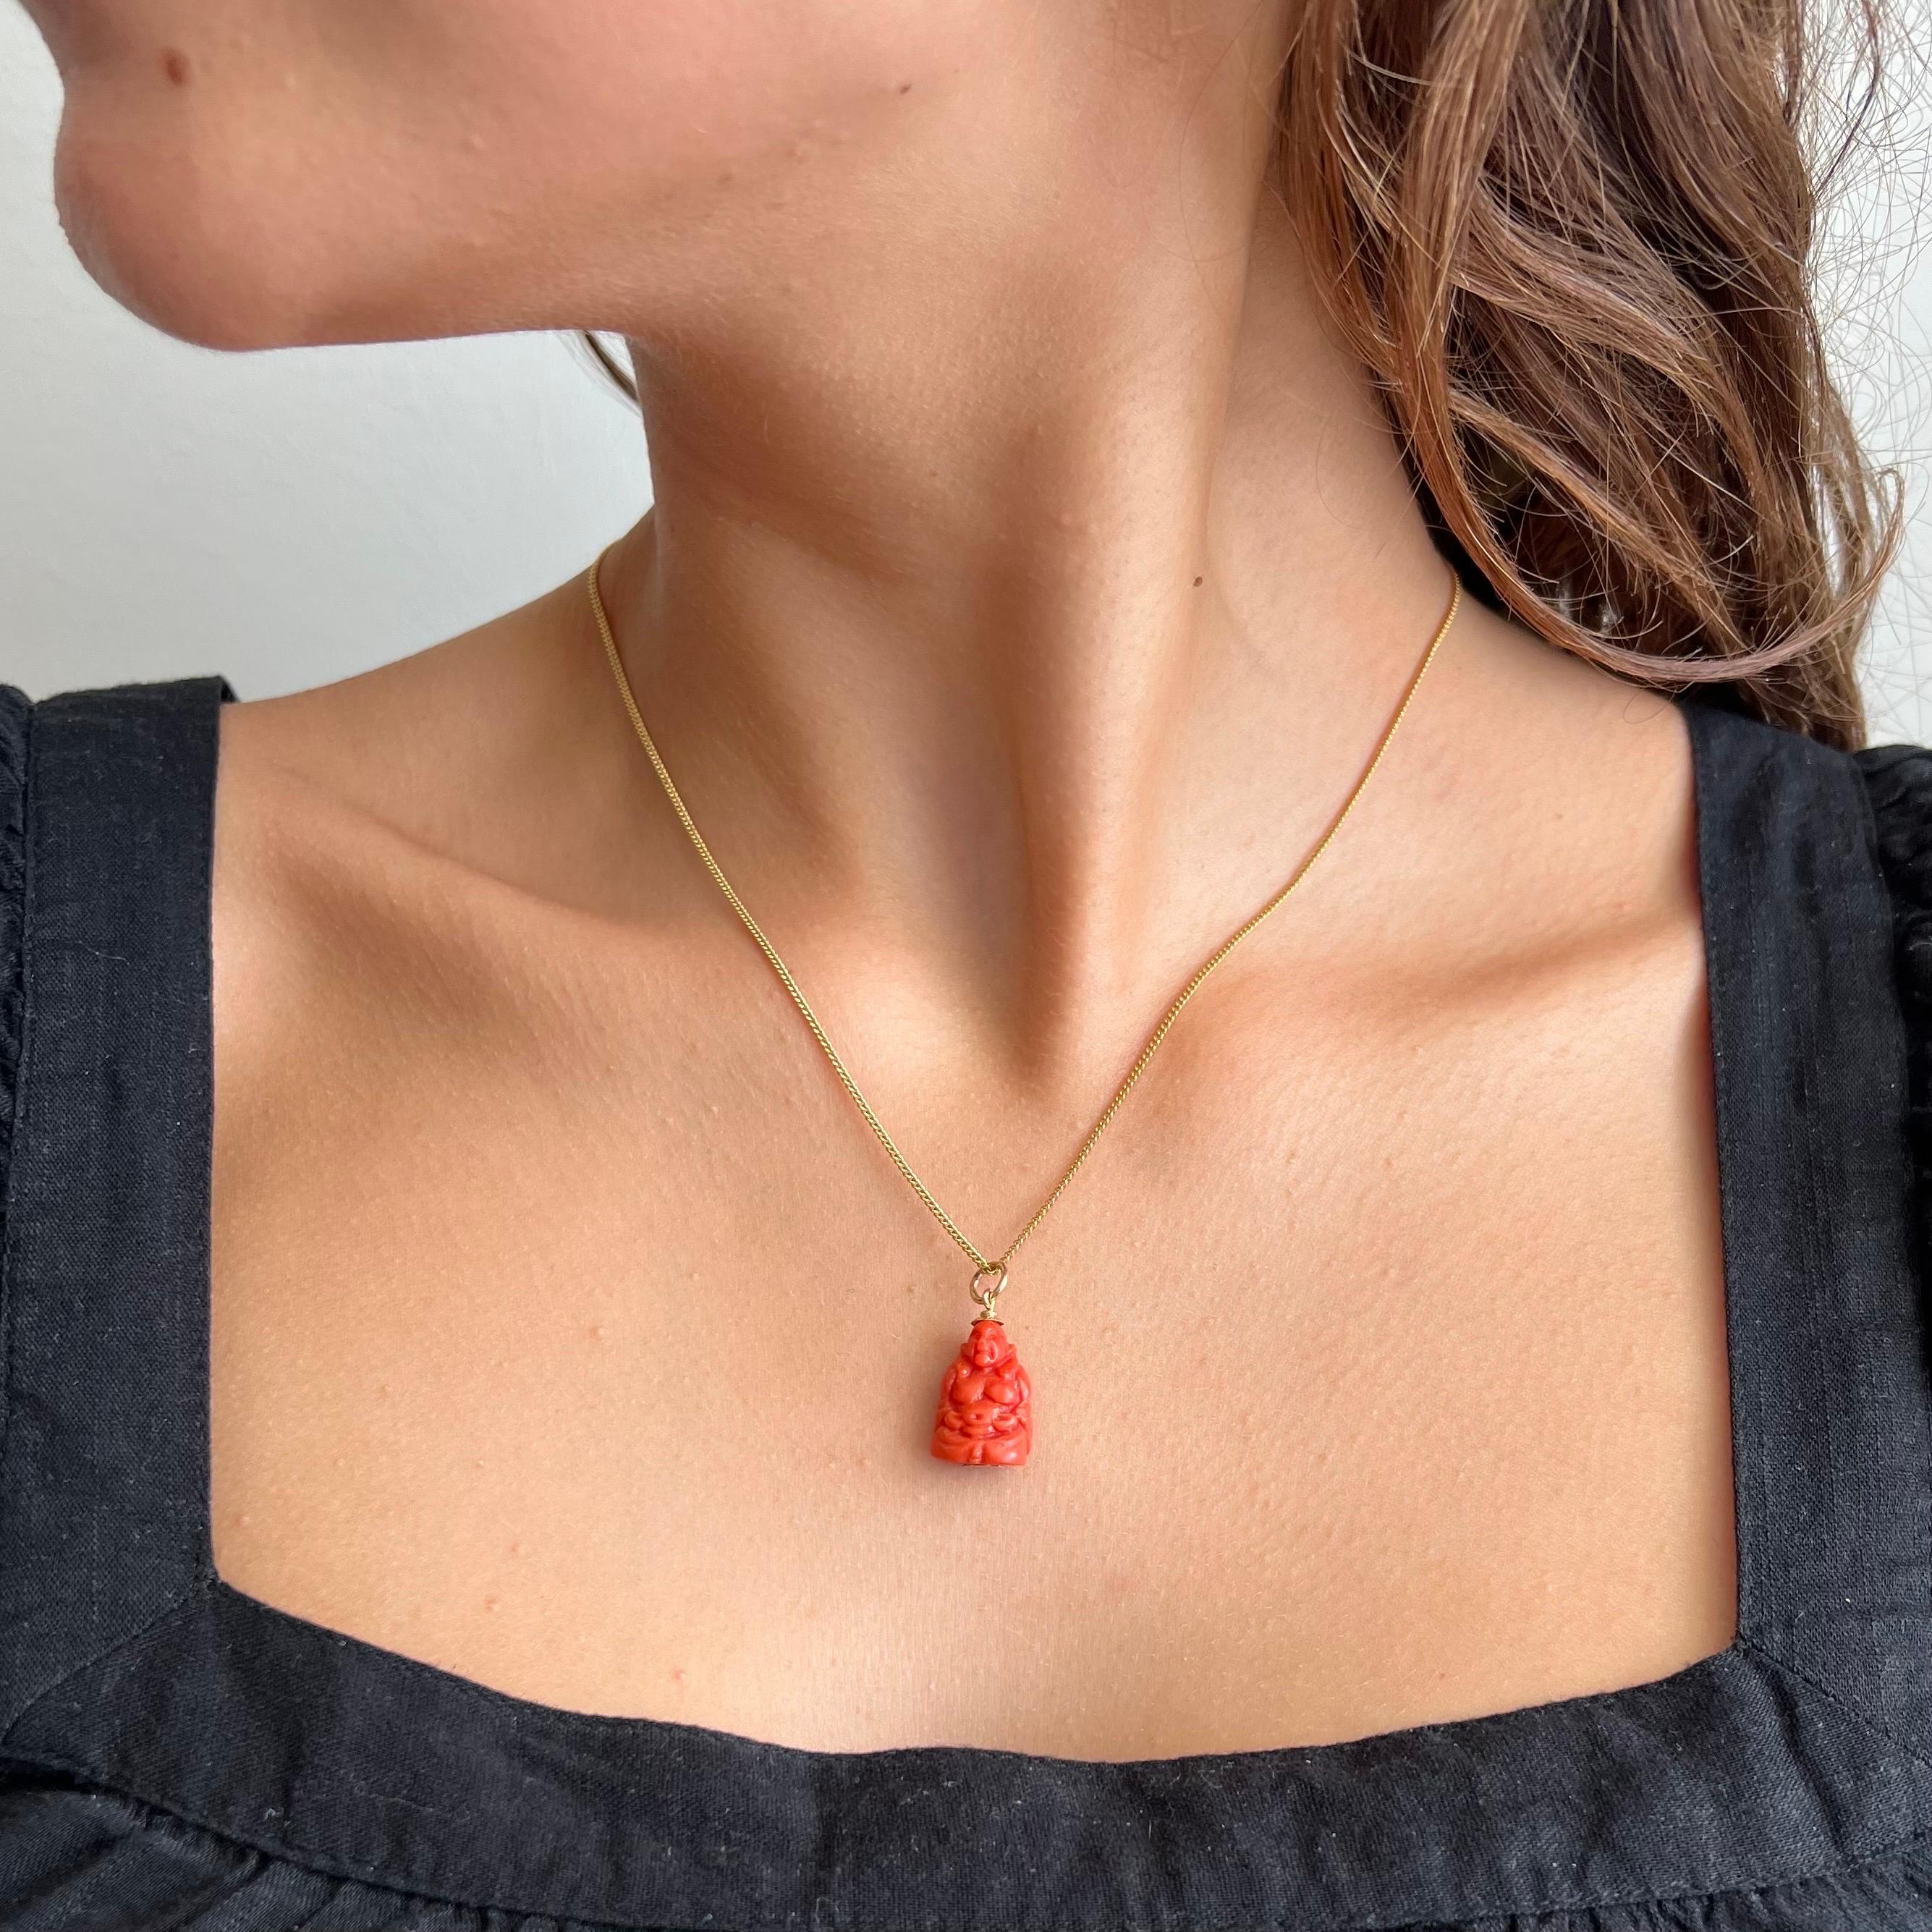 A charming carved coral sitting buddha charm pendant. This vintage coral buddha charm pendant is beautifully detailed. The lovely sitting buddha is created with an 18 karat gold bail and rosette at the bottom.

Collect your own charms as wearable